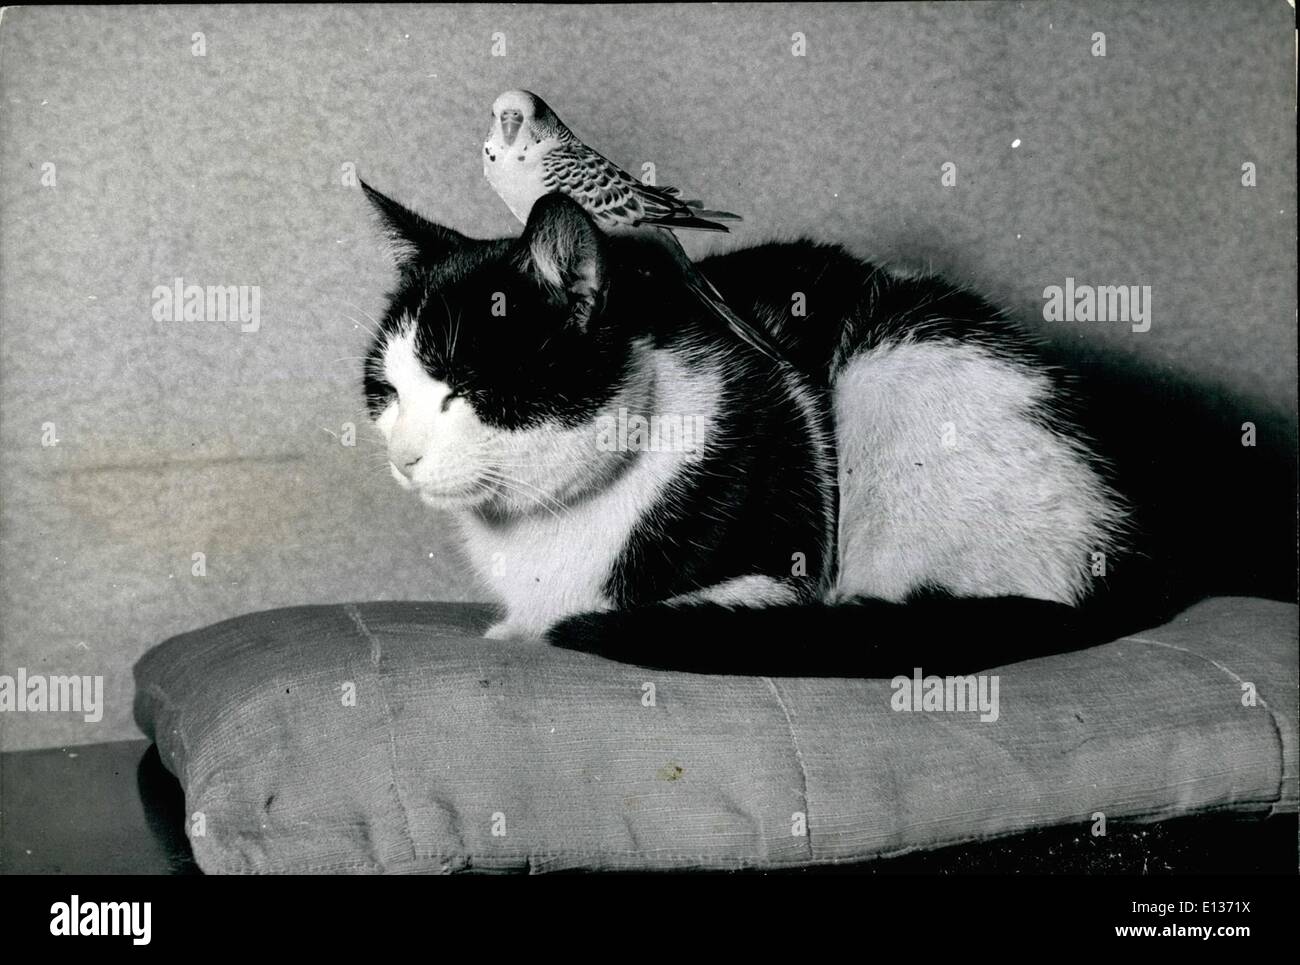 Feb. 29, 2012 - They should be sworn enemies according to the laws of nature, but there are always exceptions like this one which shows that fur and feather can agree, Jerry the budgerigar quite happily perched on the head of Fluffy the cat. Stock Photo